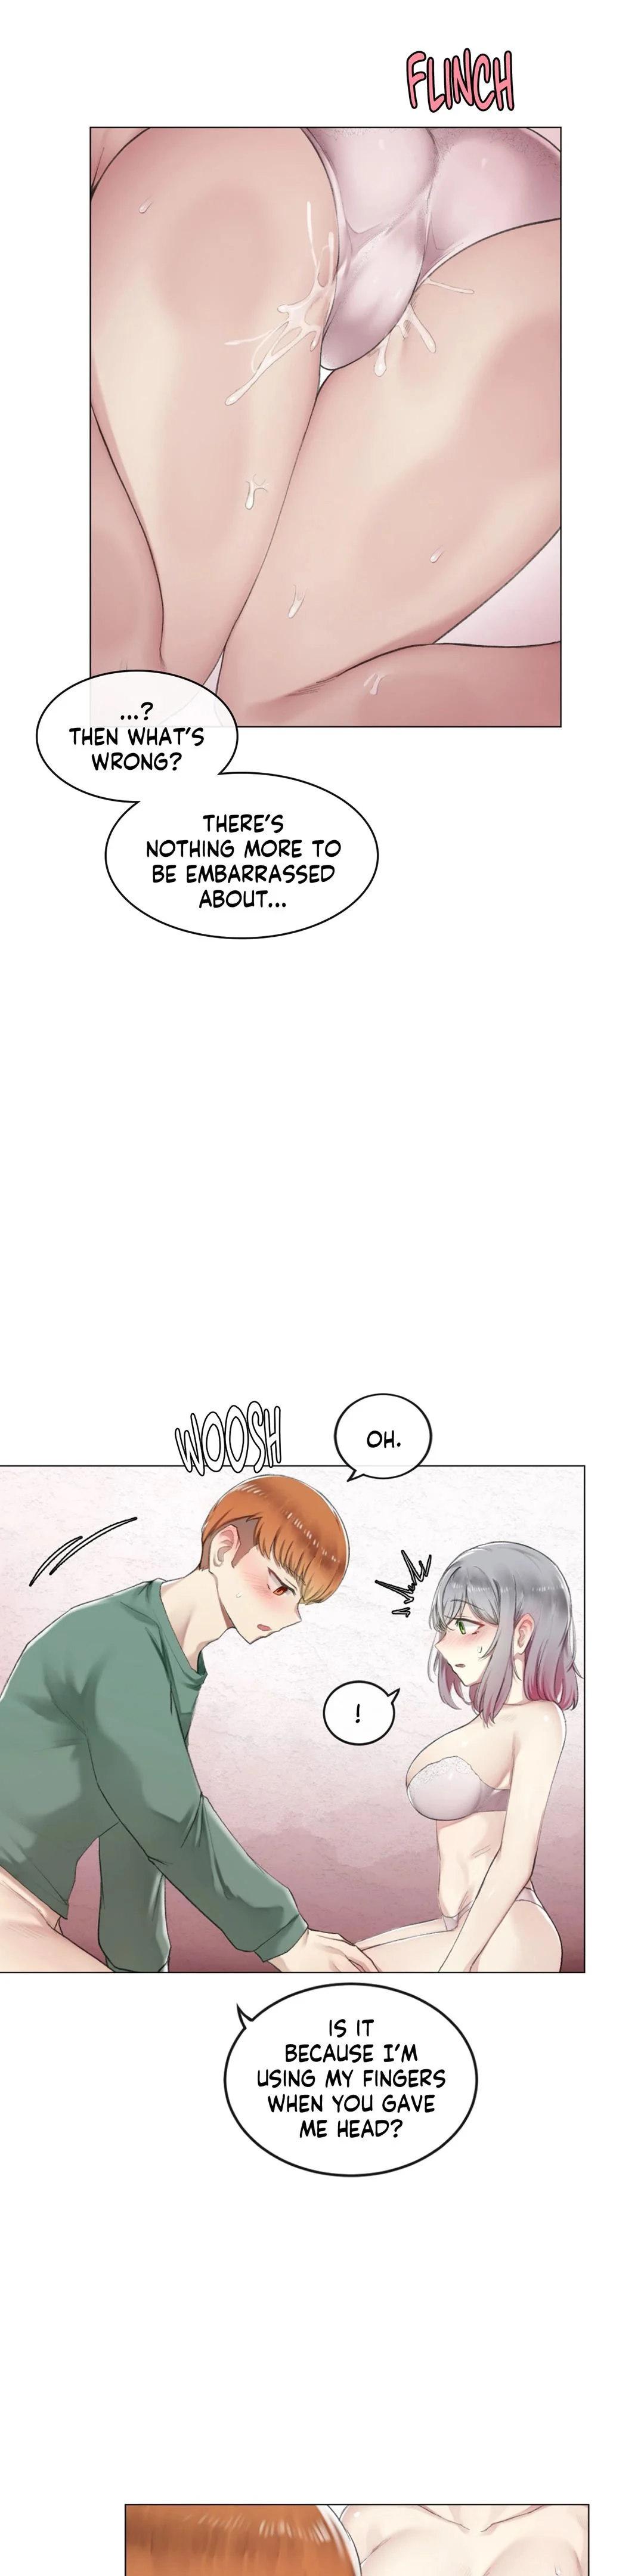 [Dumangoon, KONG_] Sexcape Room: Snap Off Ch.7/7 [English] [Manhwa PDF] Completed 72